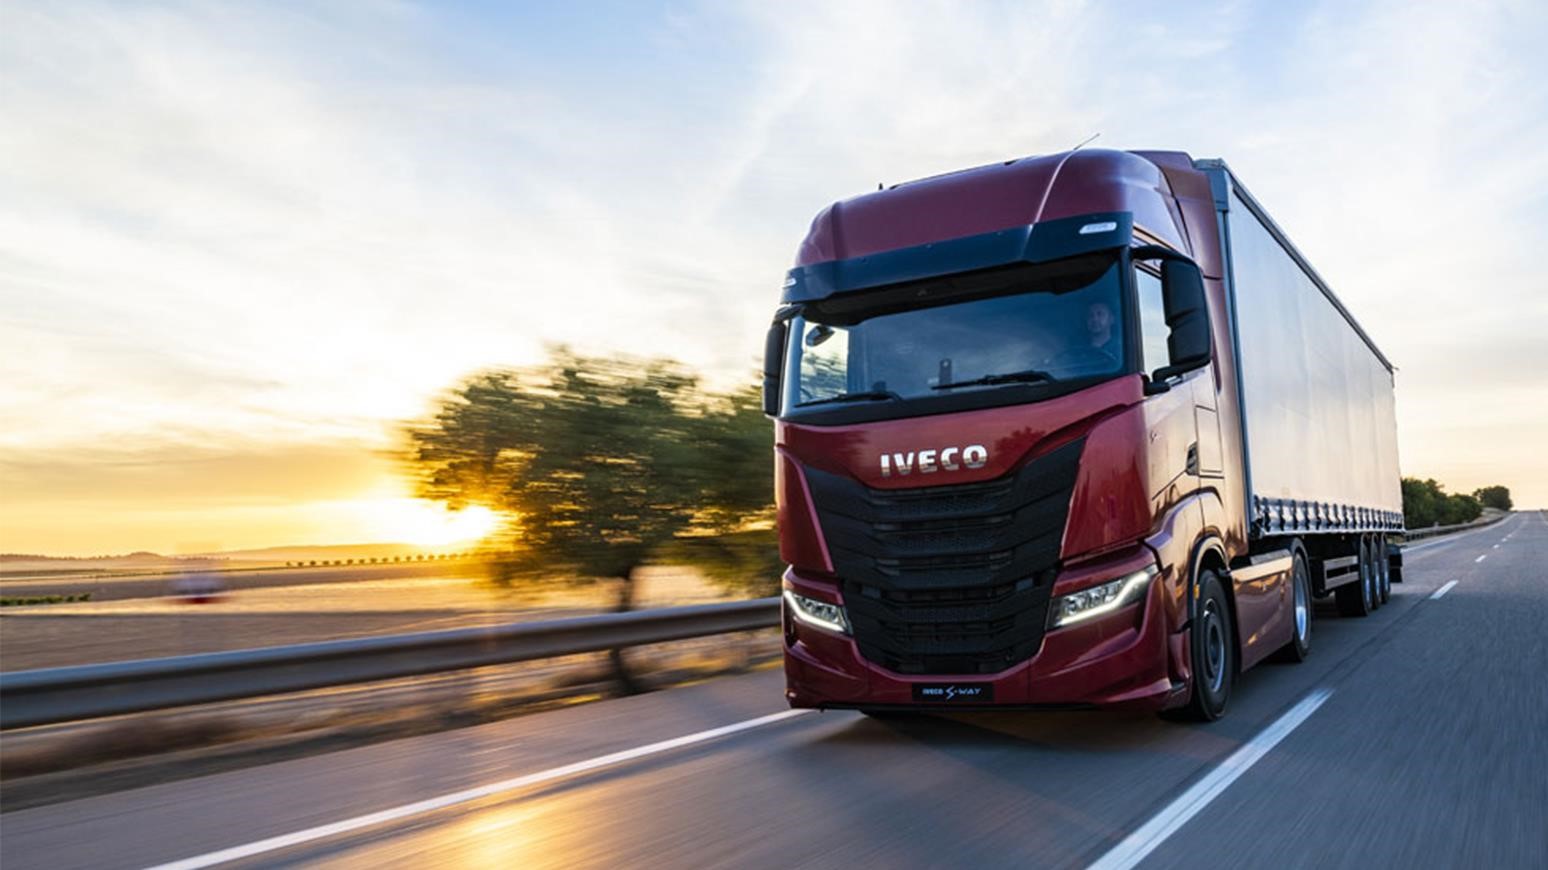 IVECO S-Way Wins iF DESIGN AWARD 2020 Thanks To Driver-Centric Design & Other Considerations